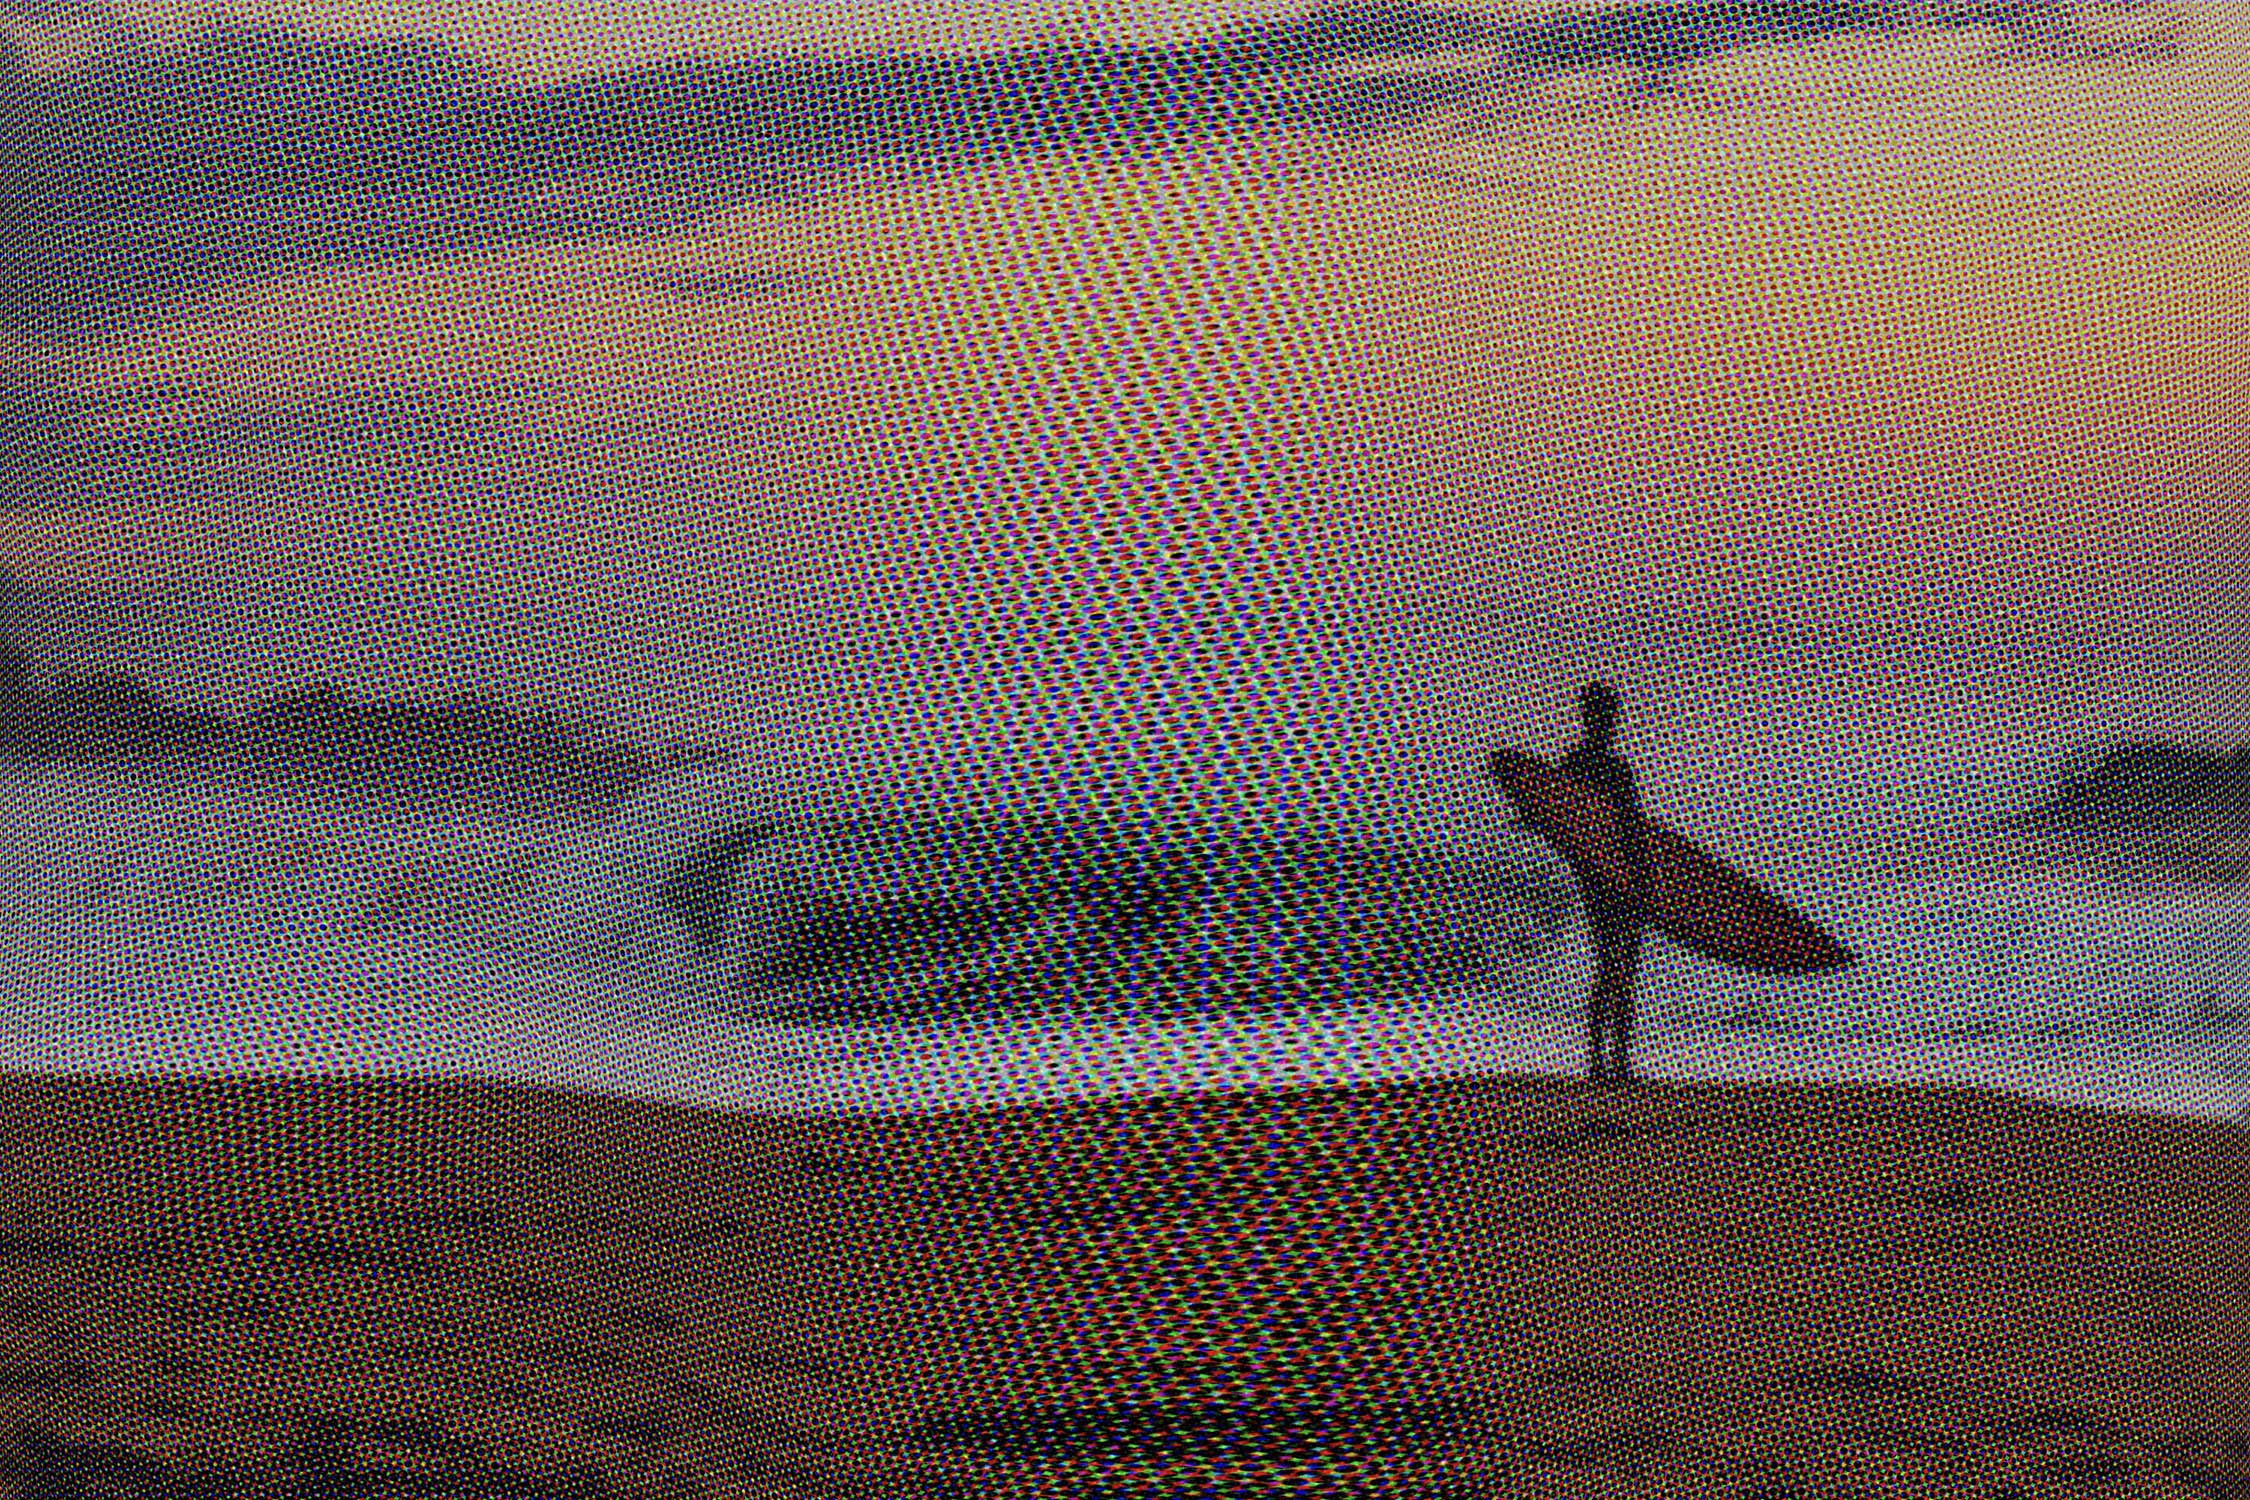 Wavy TV Static Actionpreview image.